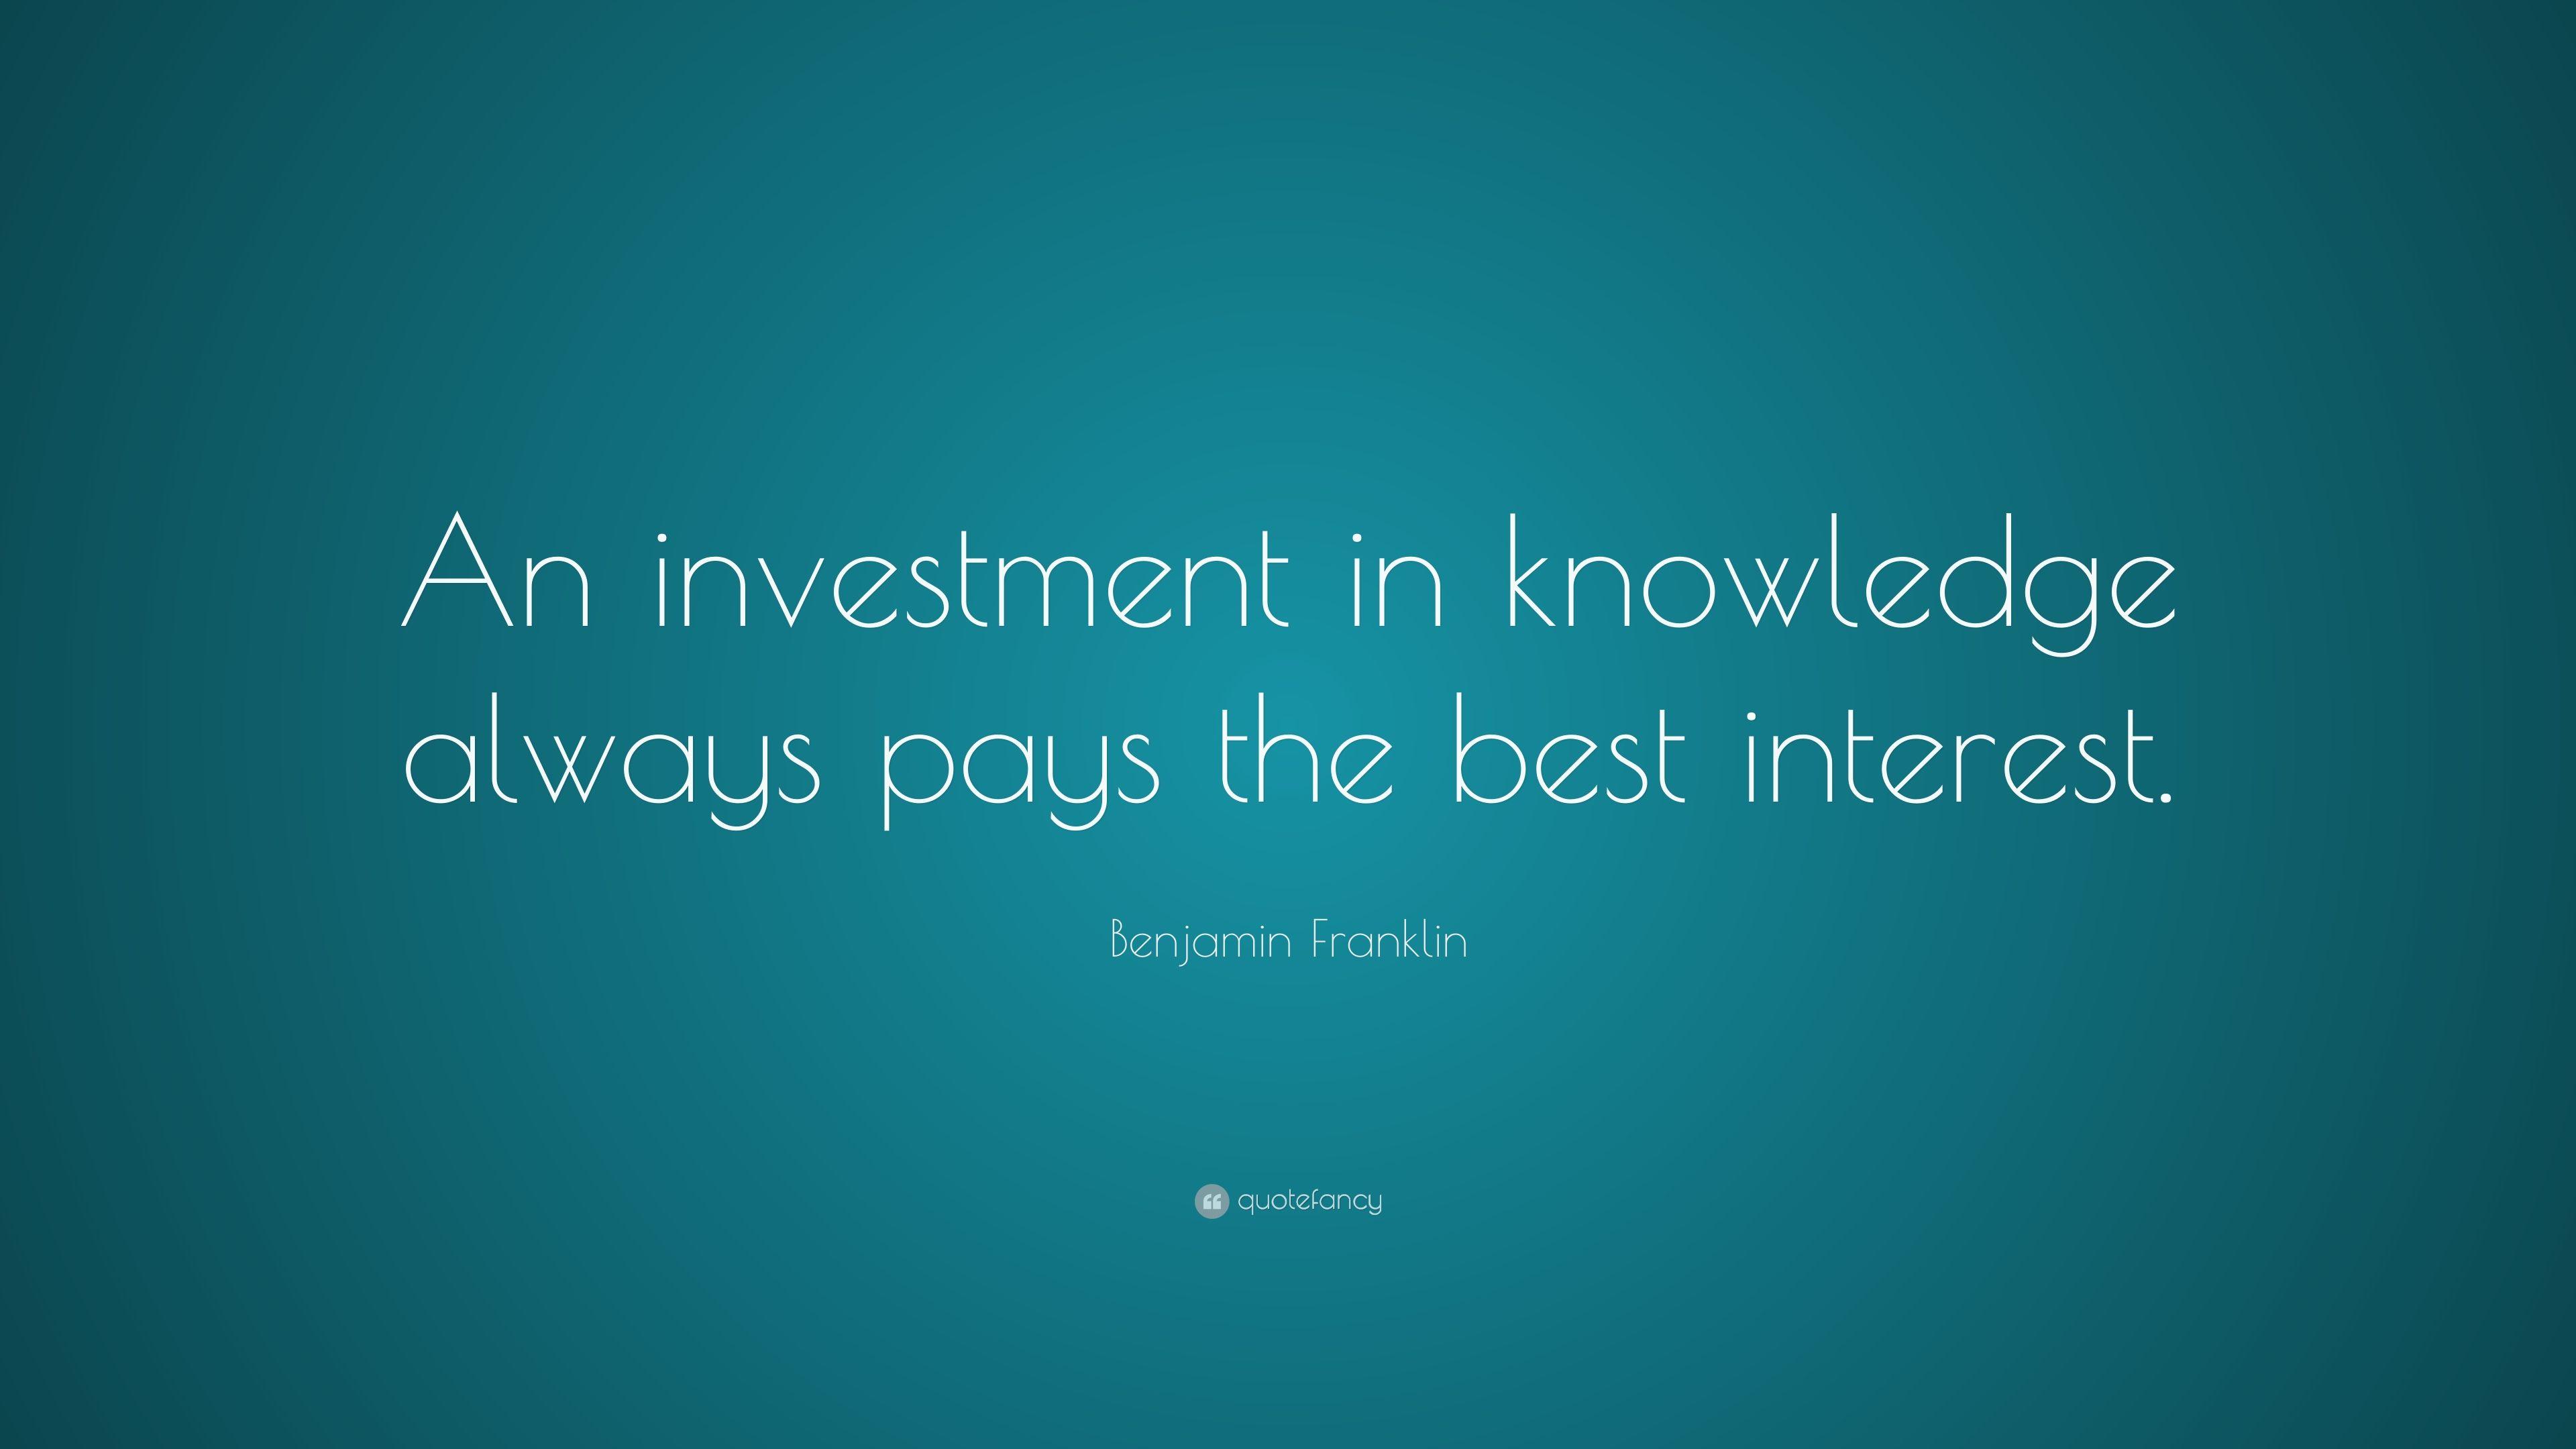 Benjamin Franklin Quote: “An investment in knowledge always pays the best interest.” (18 wallpaper)